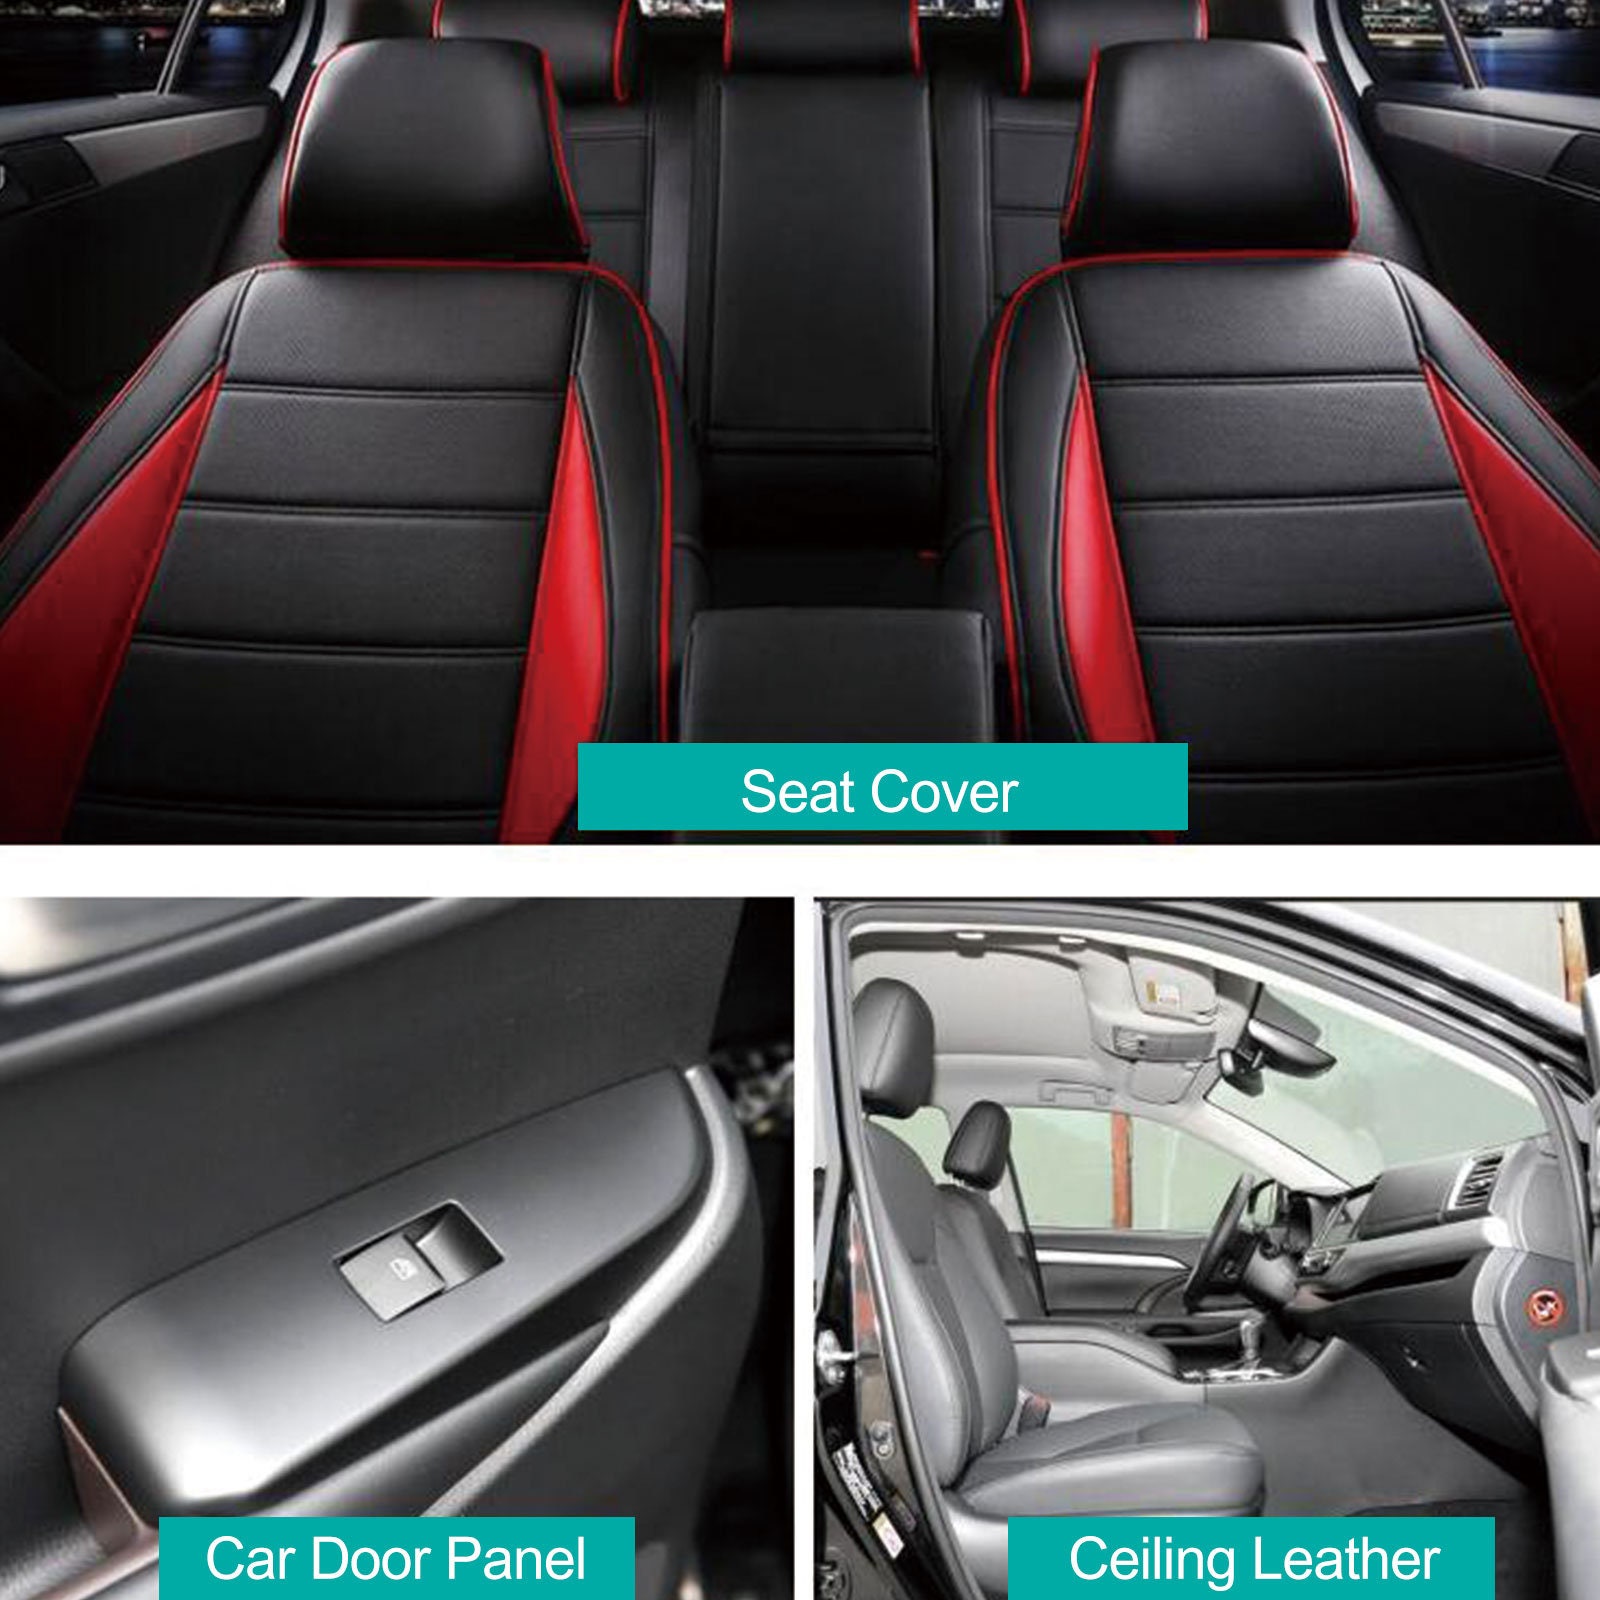 Upholstery Faux Leather for Cars and Sofas ♥ Up to 80% Off - I